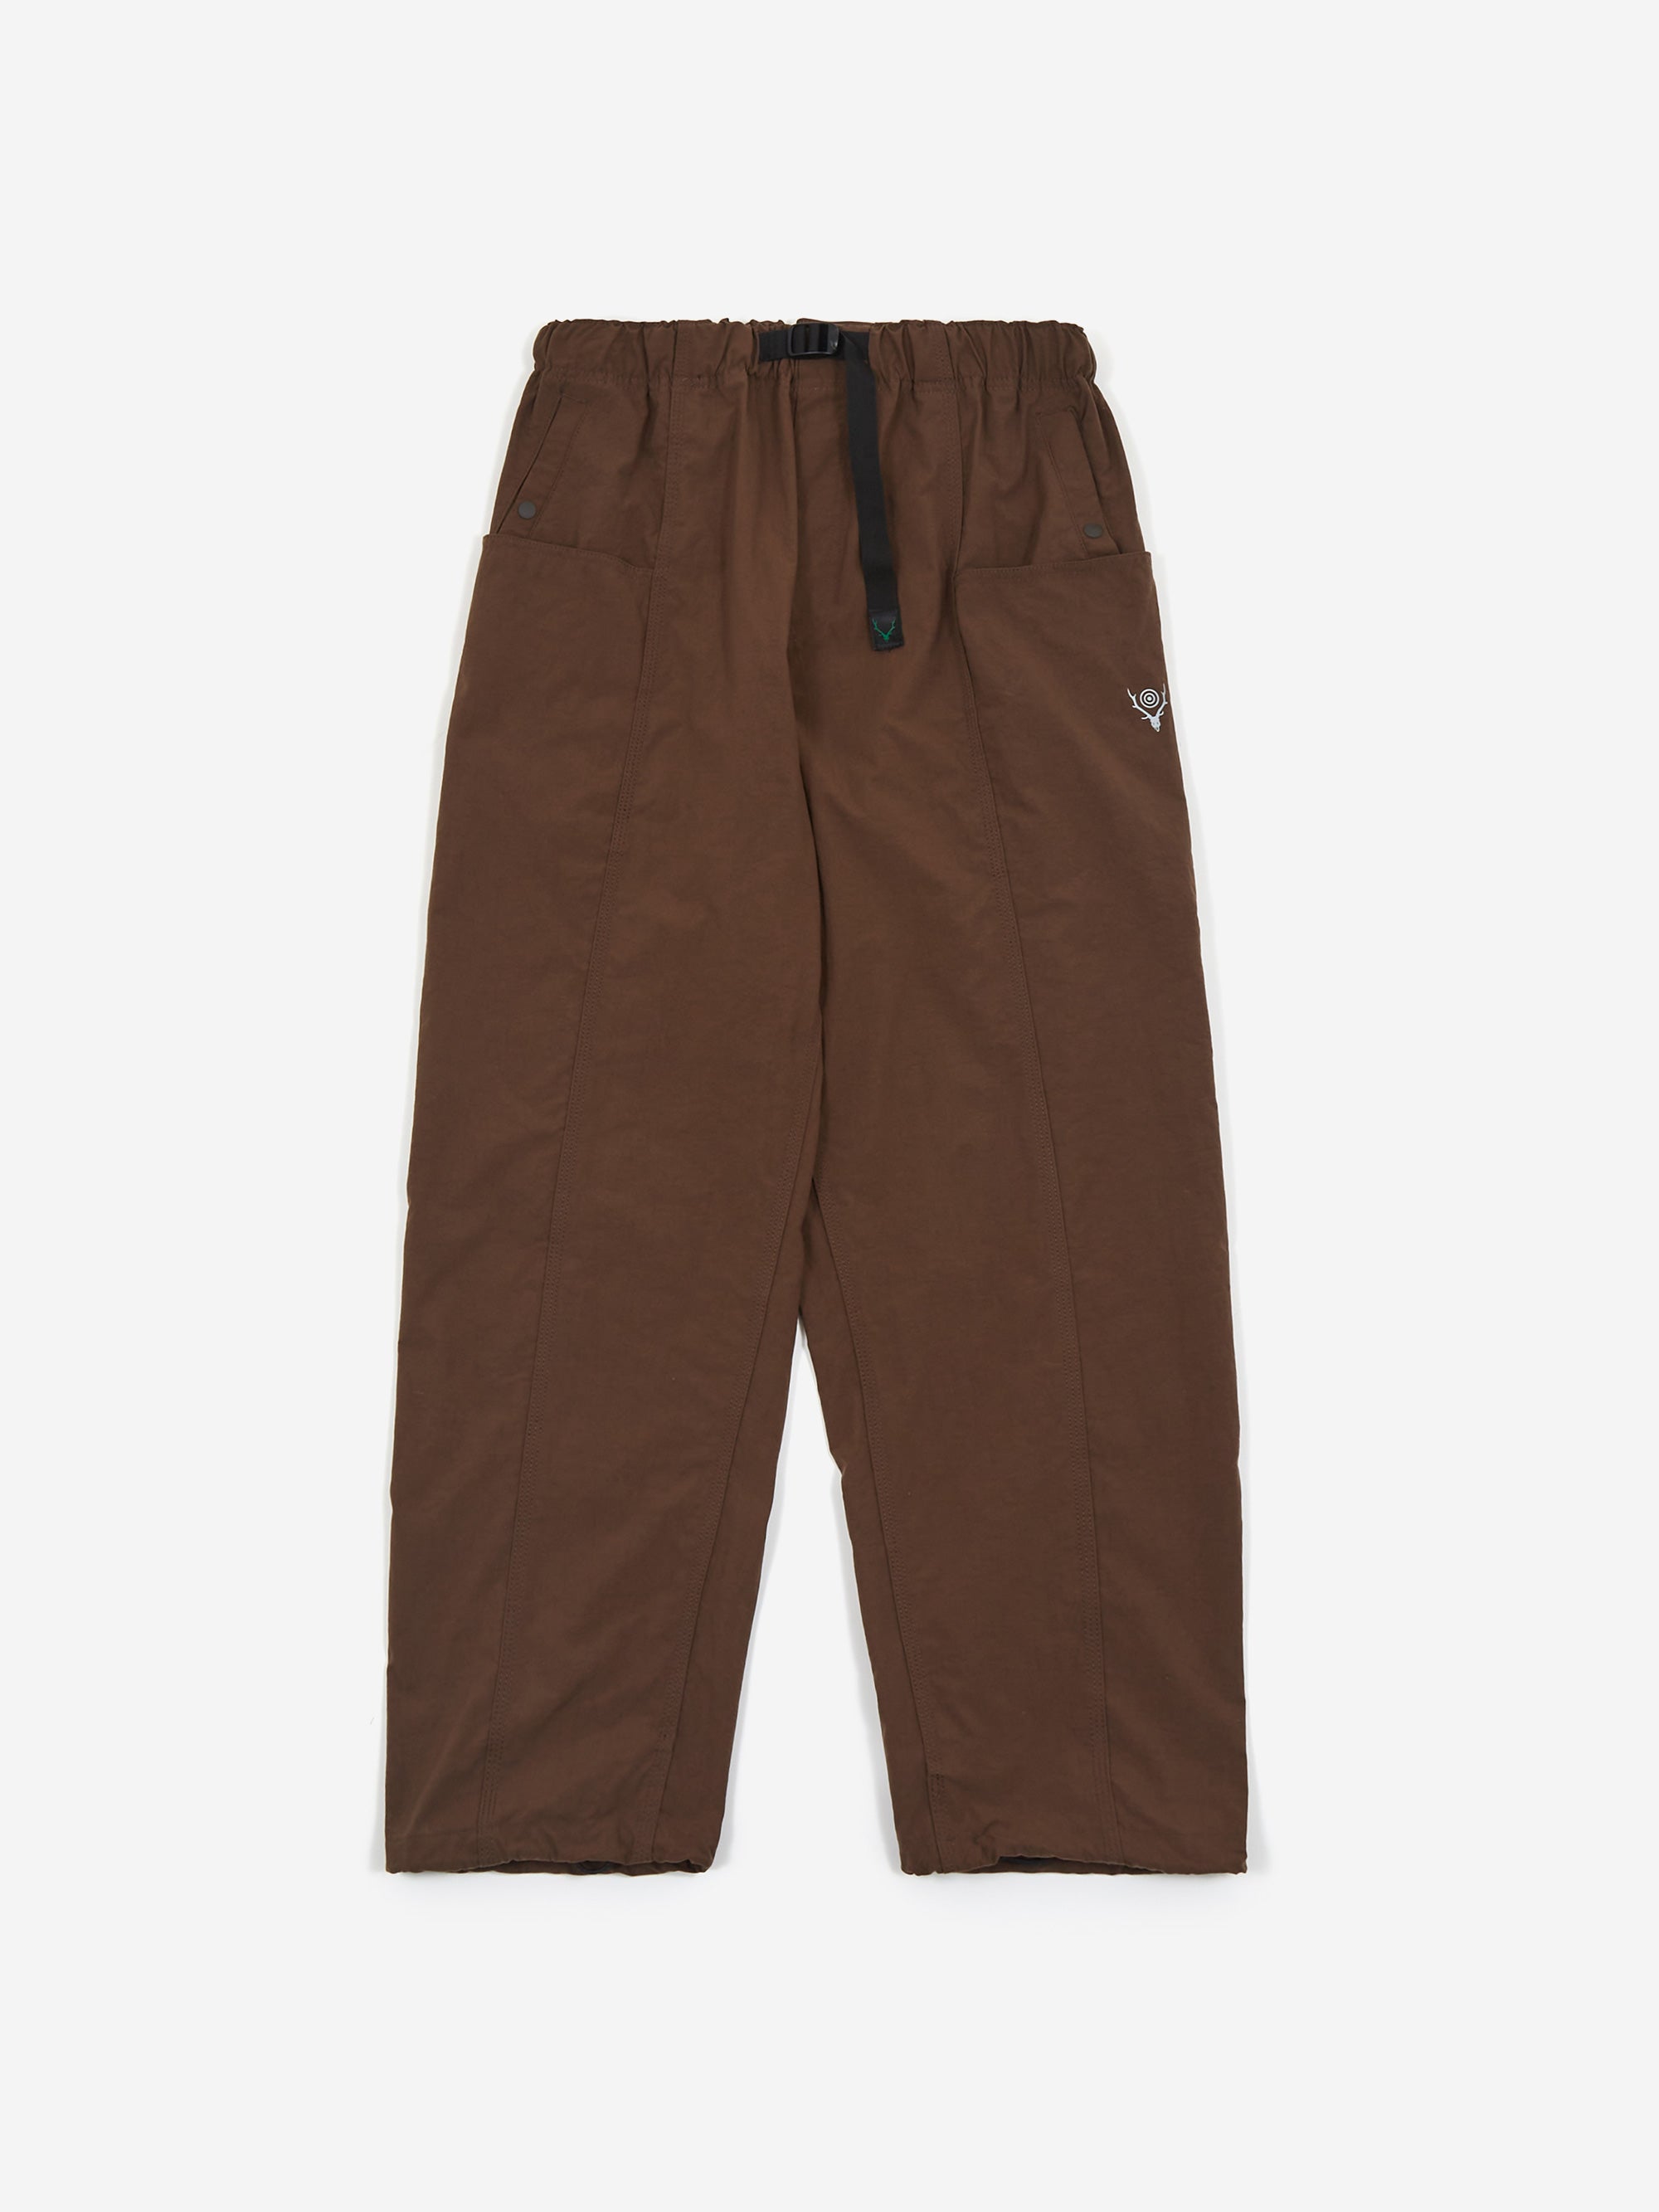 South2 West8 Belted C.S. Pant - Nylon Oxford - Brown